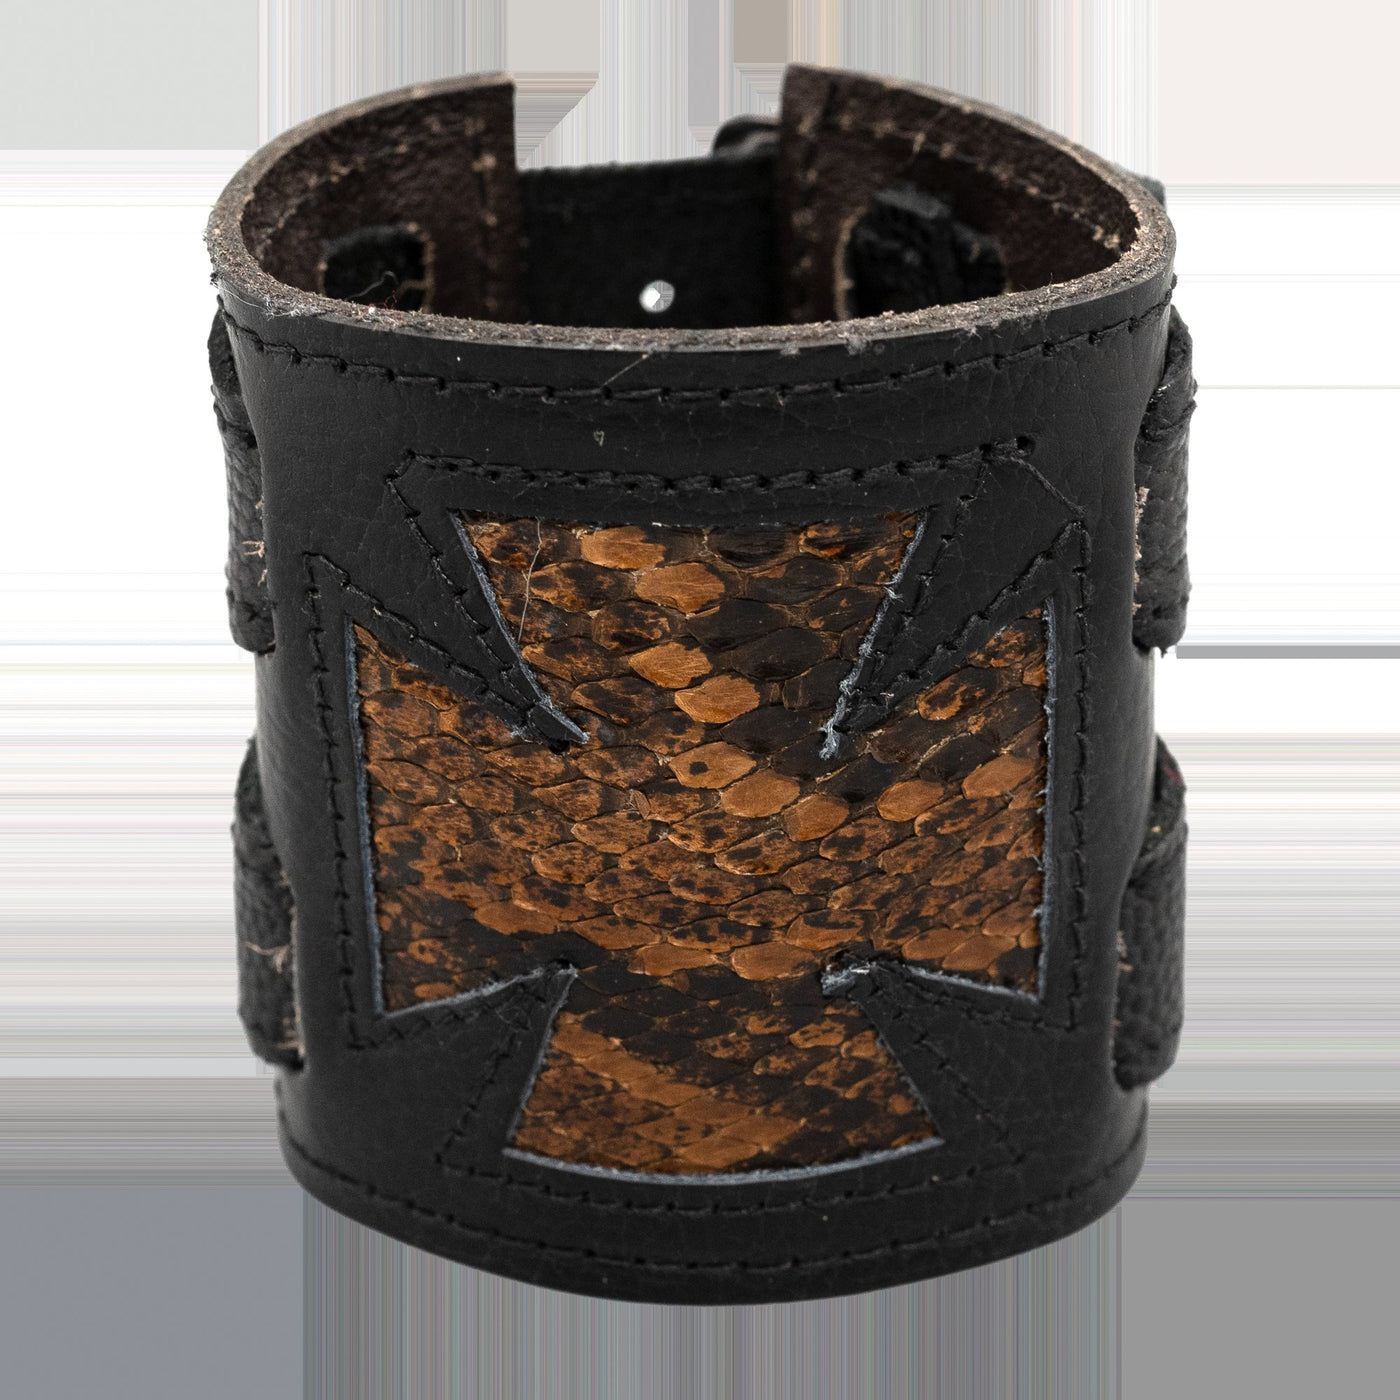 Handmade Leather wristband with a real vintage snakeskin Iron cross inlay. Attached with 2 buckles, so fully adjustable